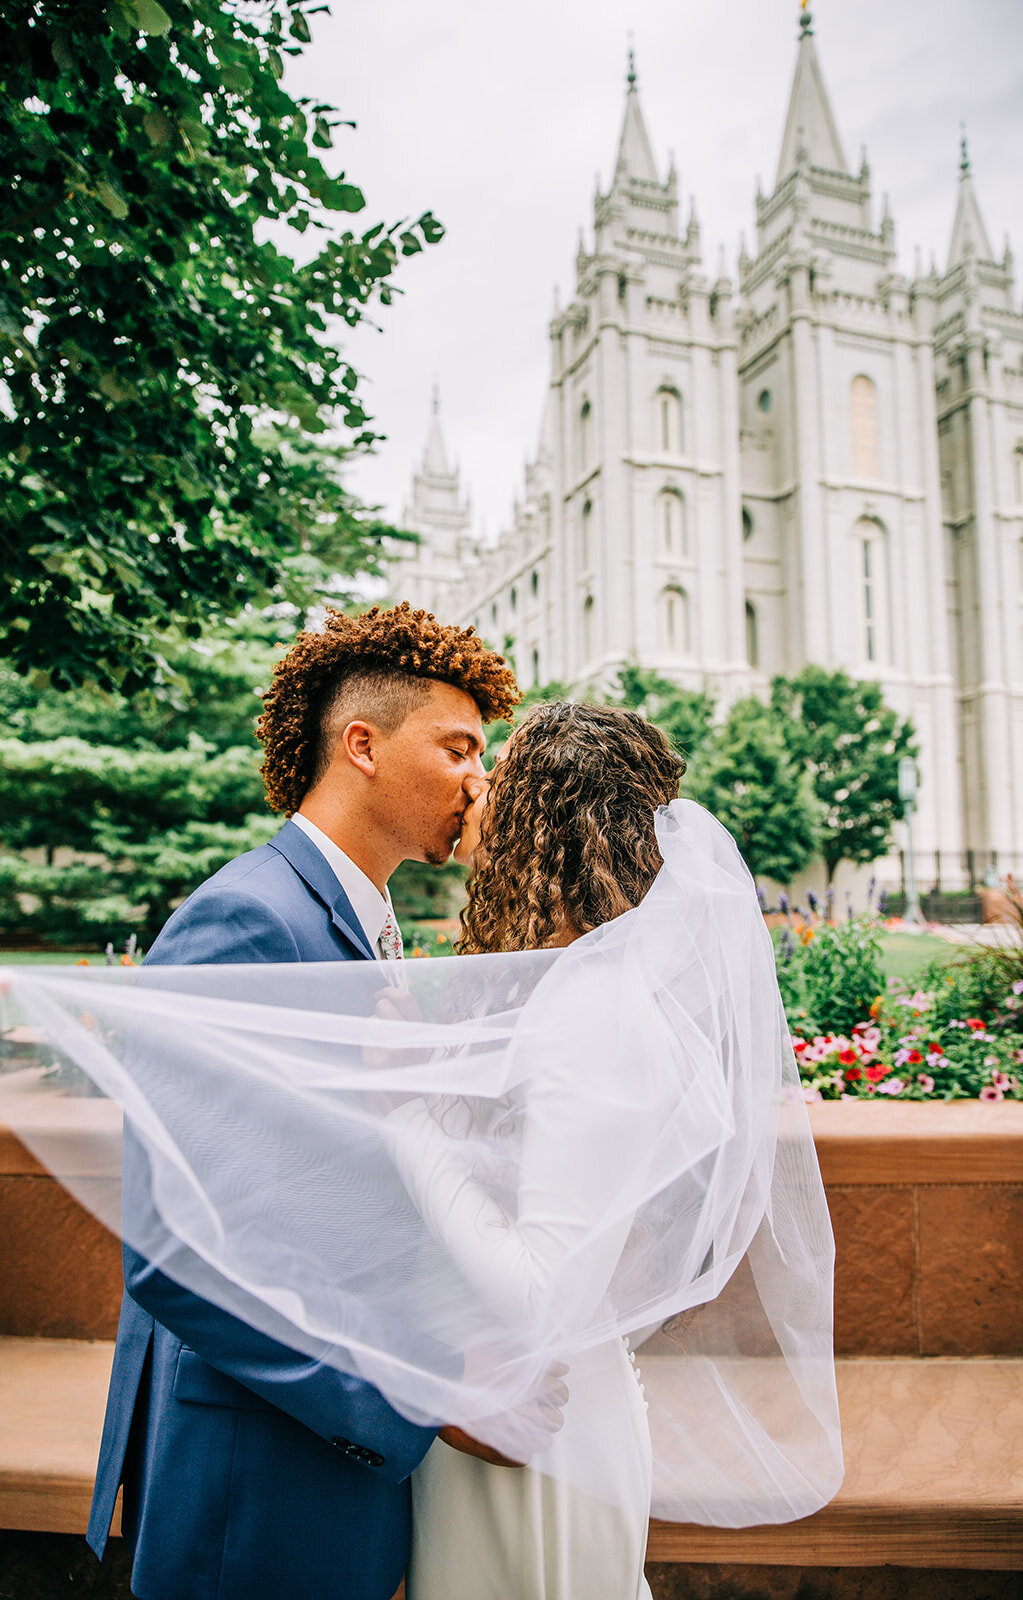  veil shot bride and groom kissing behind the veil bridals at temple square outside the salt lake city temple winter wedding bridal ensemble inspo long veil curly hair bride and groom hair ideas style inspiration for young couple wedding blue suit te